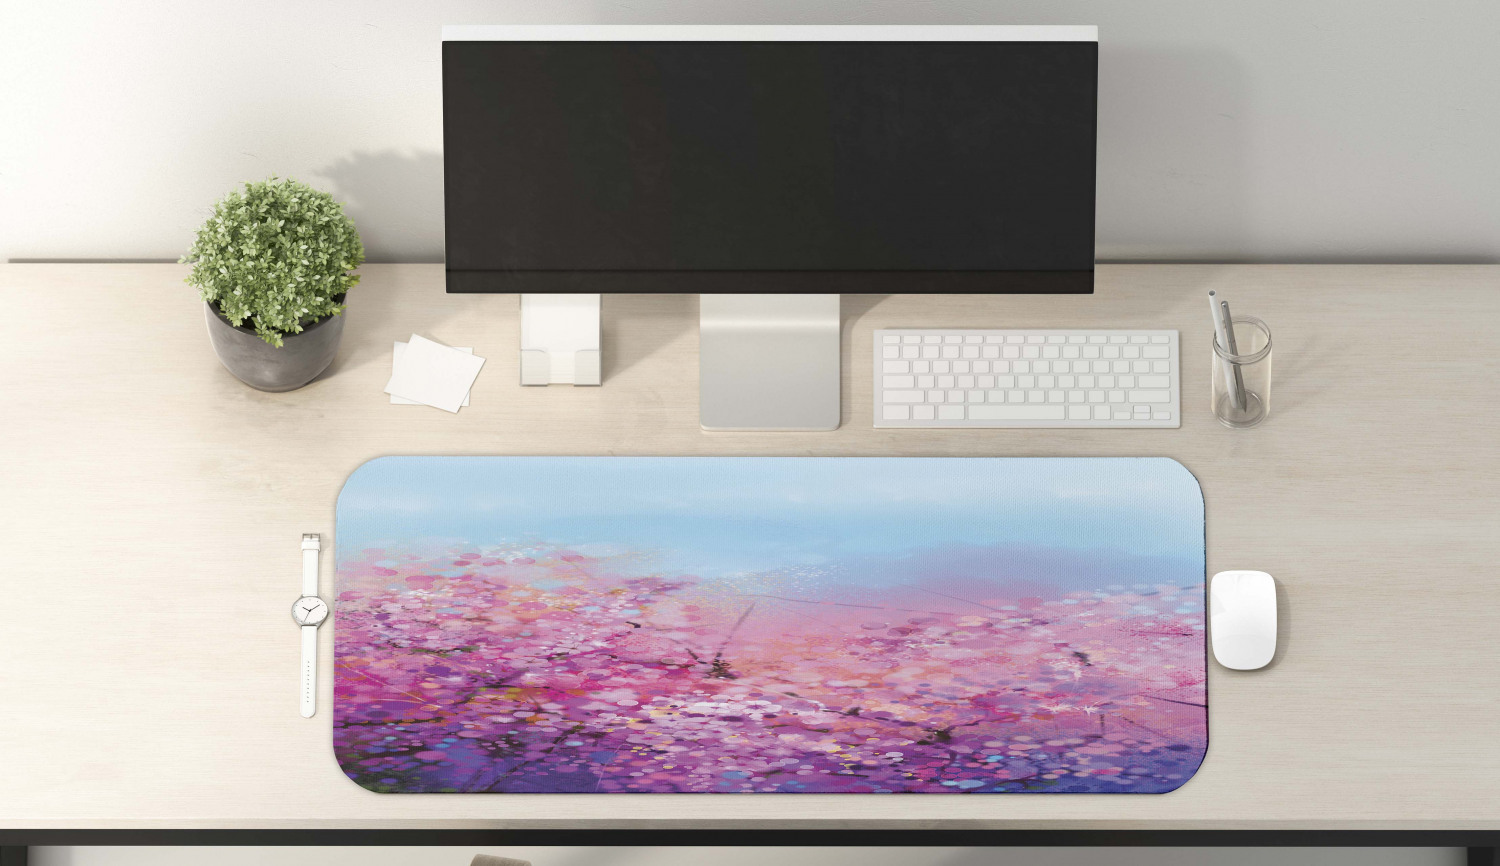 Flower Computer Mouse Pad, Sakura Blossom Floral Beauty with Sky Japanese Inspired Cherry Spring Theme, Rectangle Non-Slip Rubber Mousepad Large, 31" x 12" Gaming Size, Purple Pale Blue, by Ambesonne - image 2 of 2